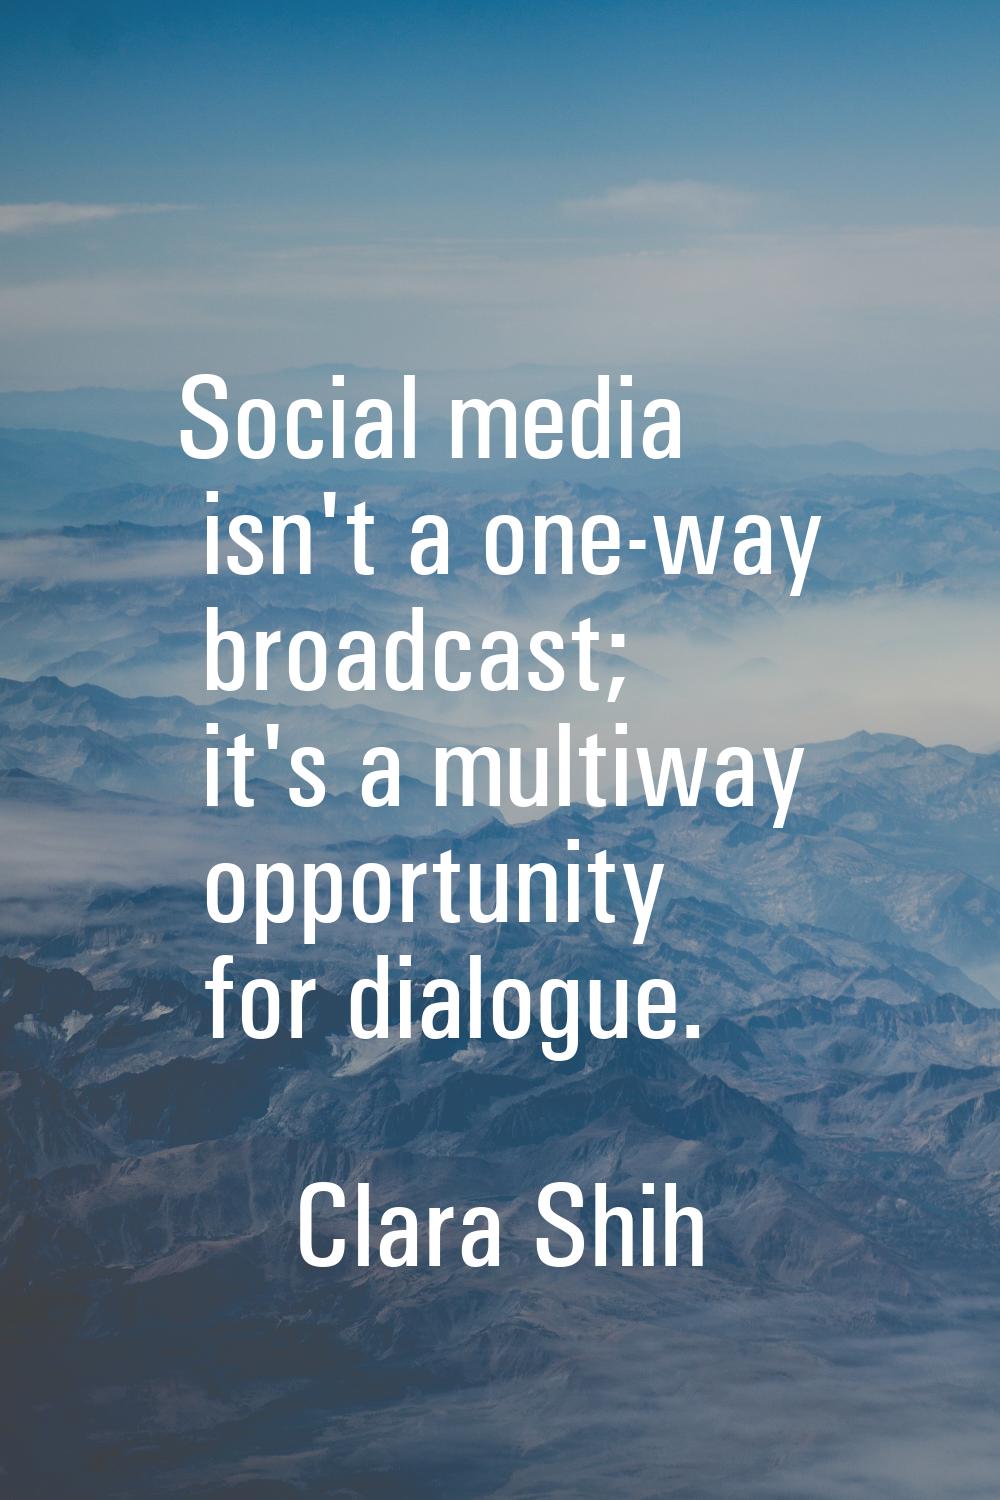 Social media isn't a one-way broadcast; it's a multiway opportunity for dialogue.